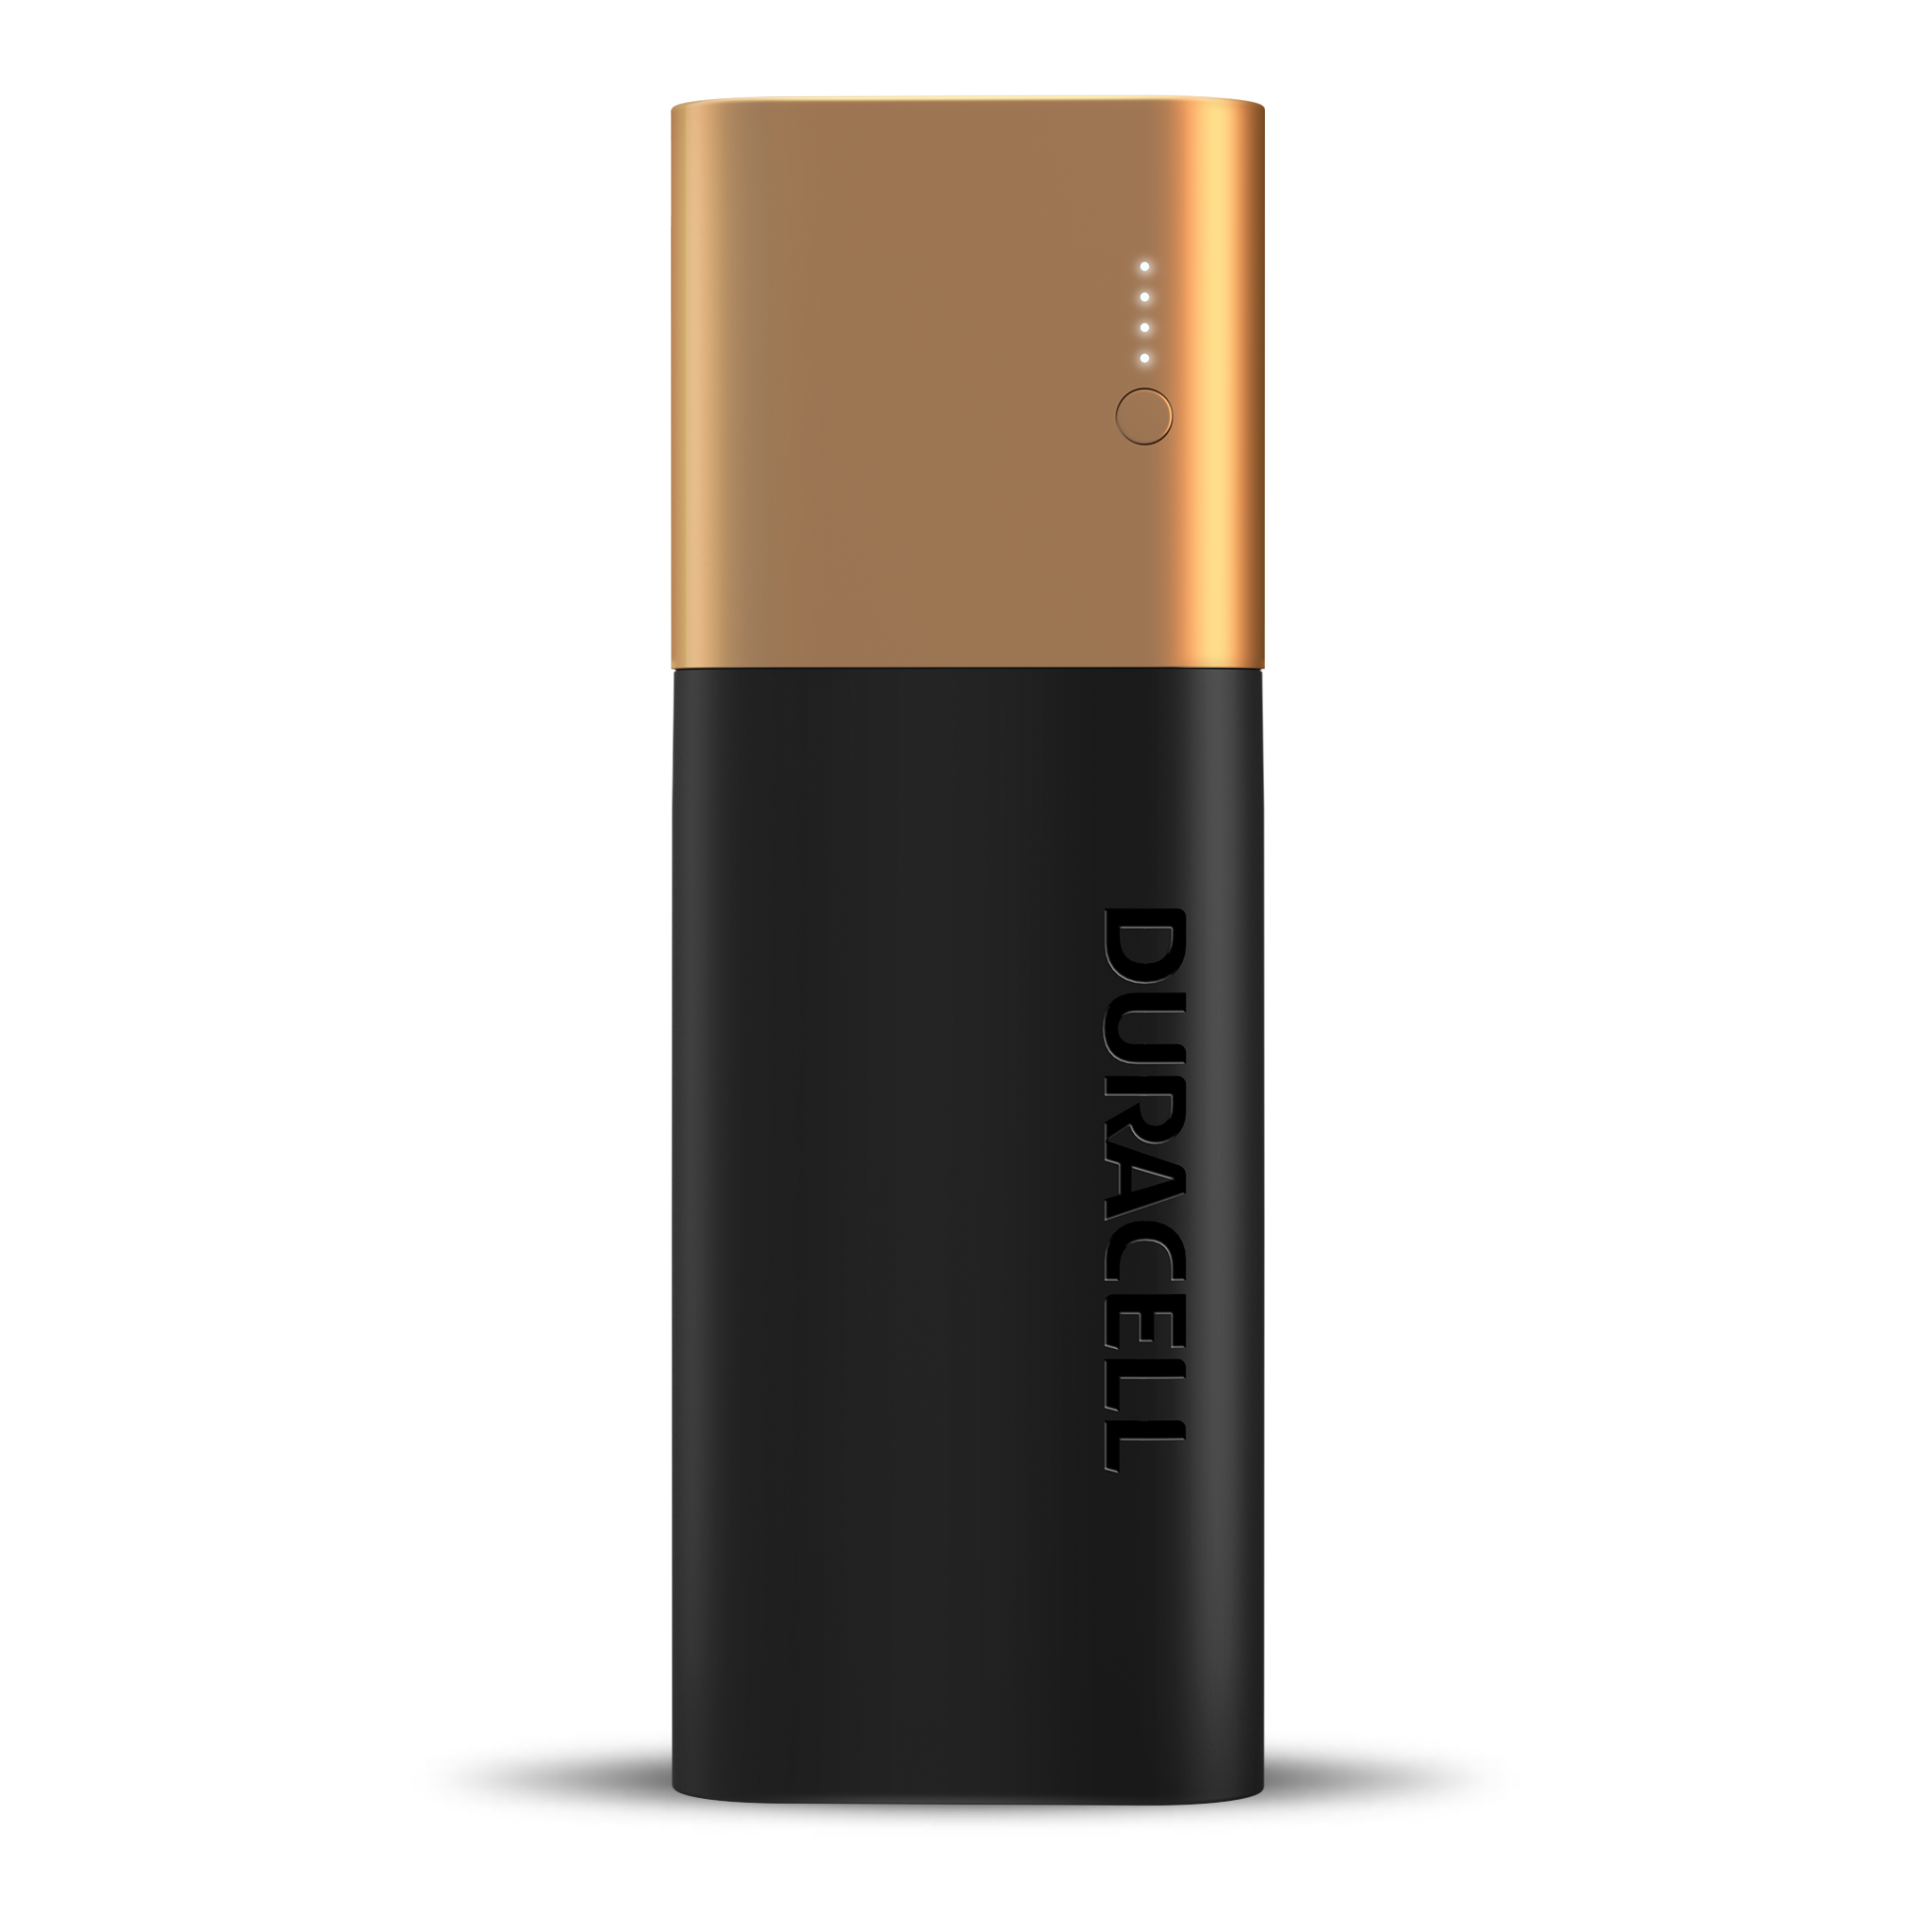 rectangluar black and copper 7 day Powerbank battery